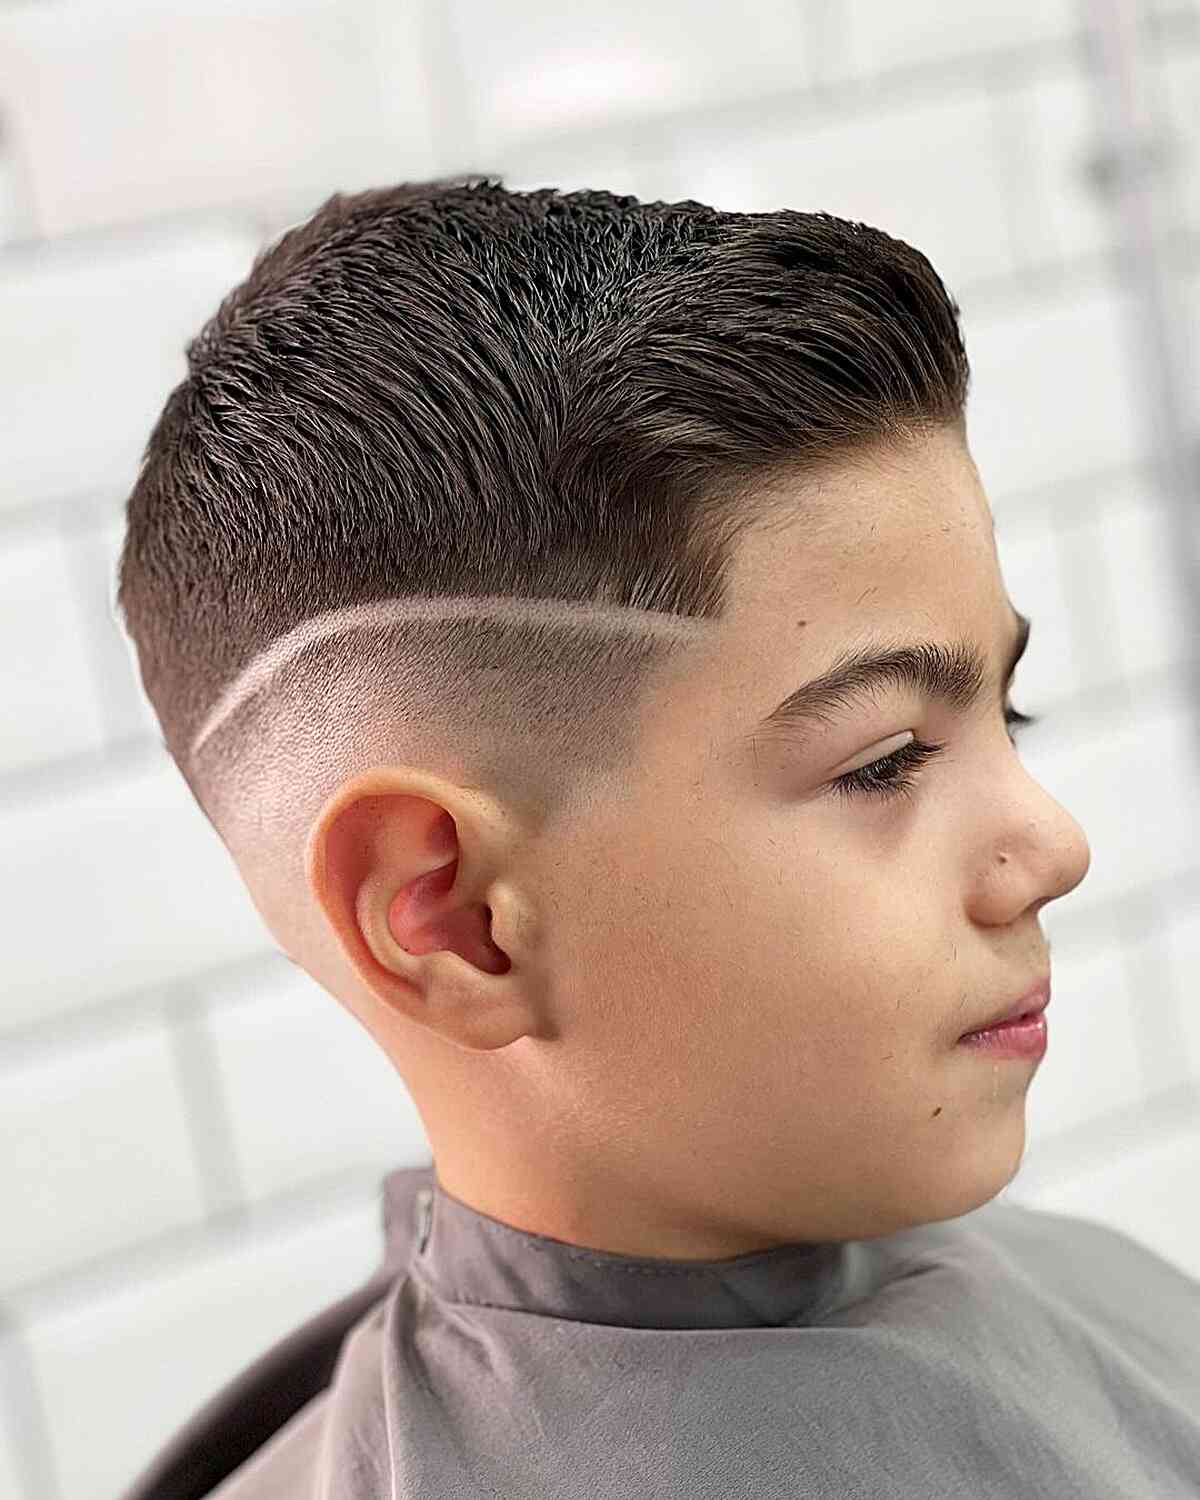 Skin Fade with a Line for Younger Boys